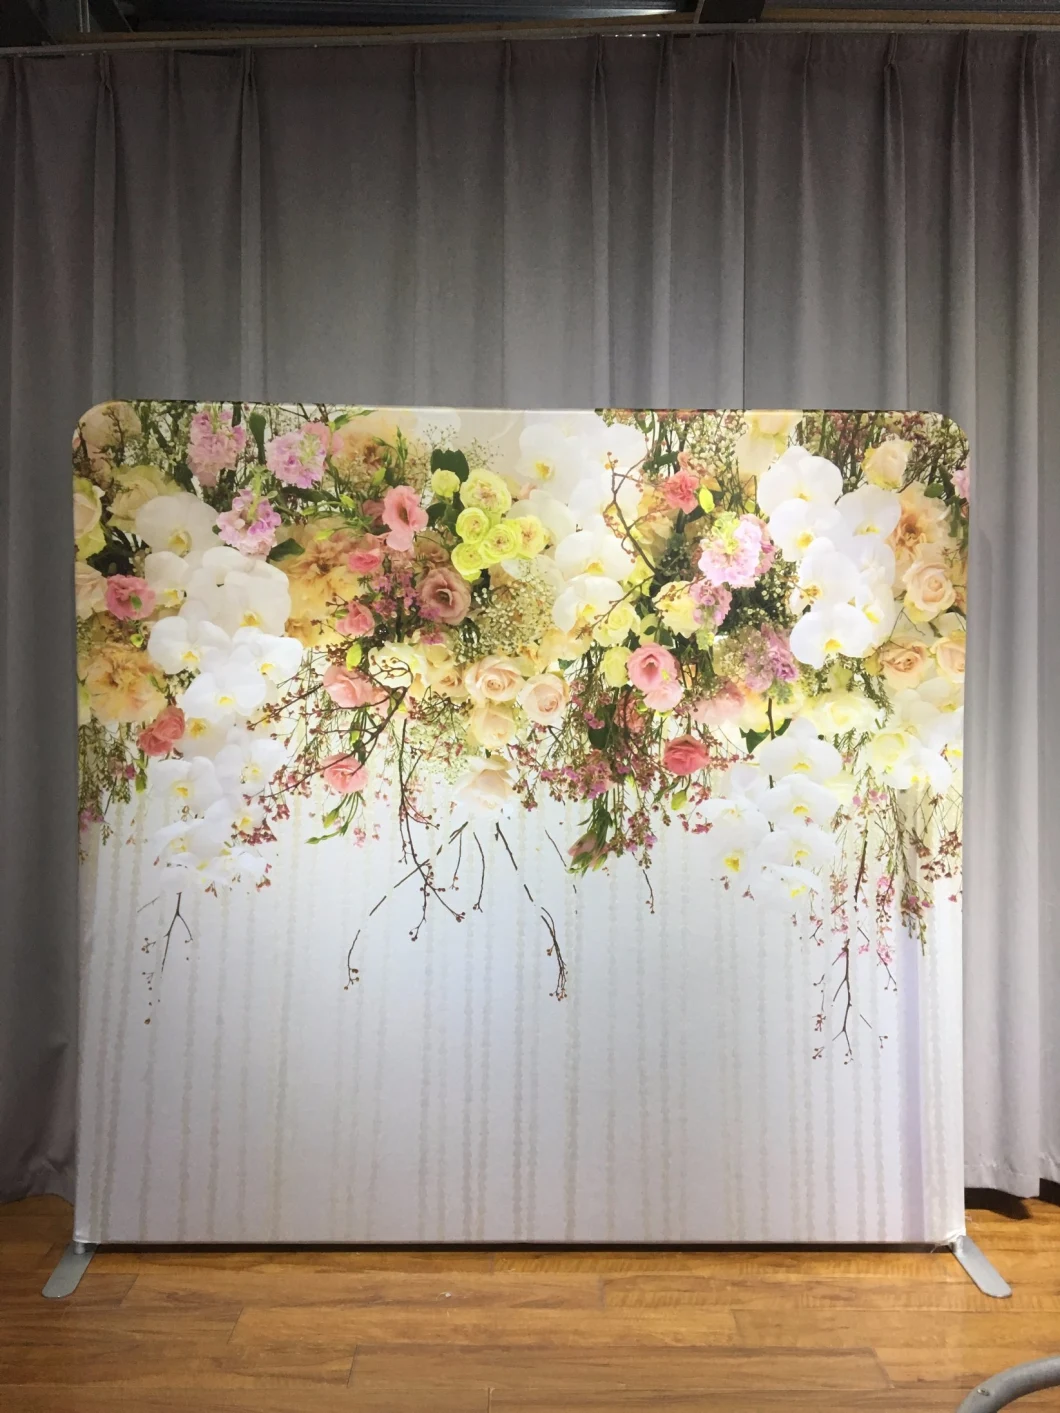 8X8 Solid Color or Free Design Customized Photo Booth Backdrops